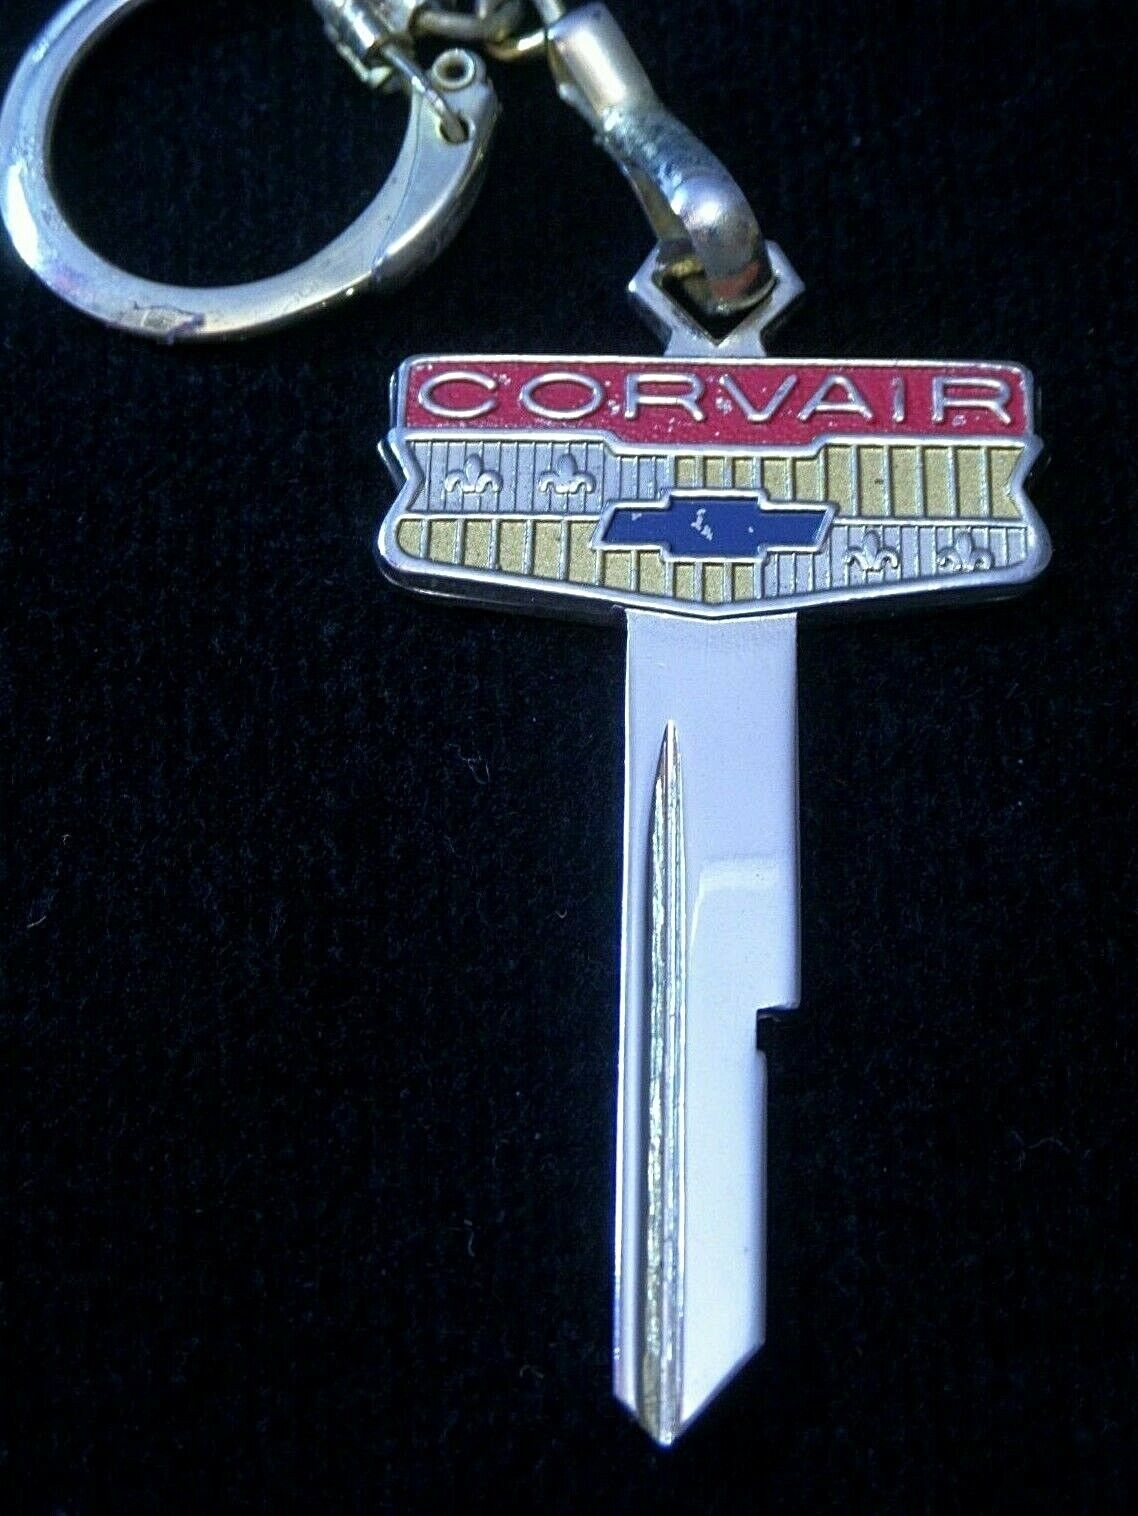 1968 CHEVROLET CORVAIR Gold Crest KEY BLANK fits 1968 NOS sealed Monza Vintage